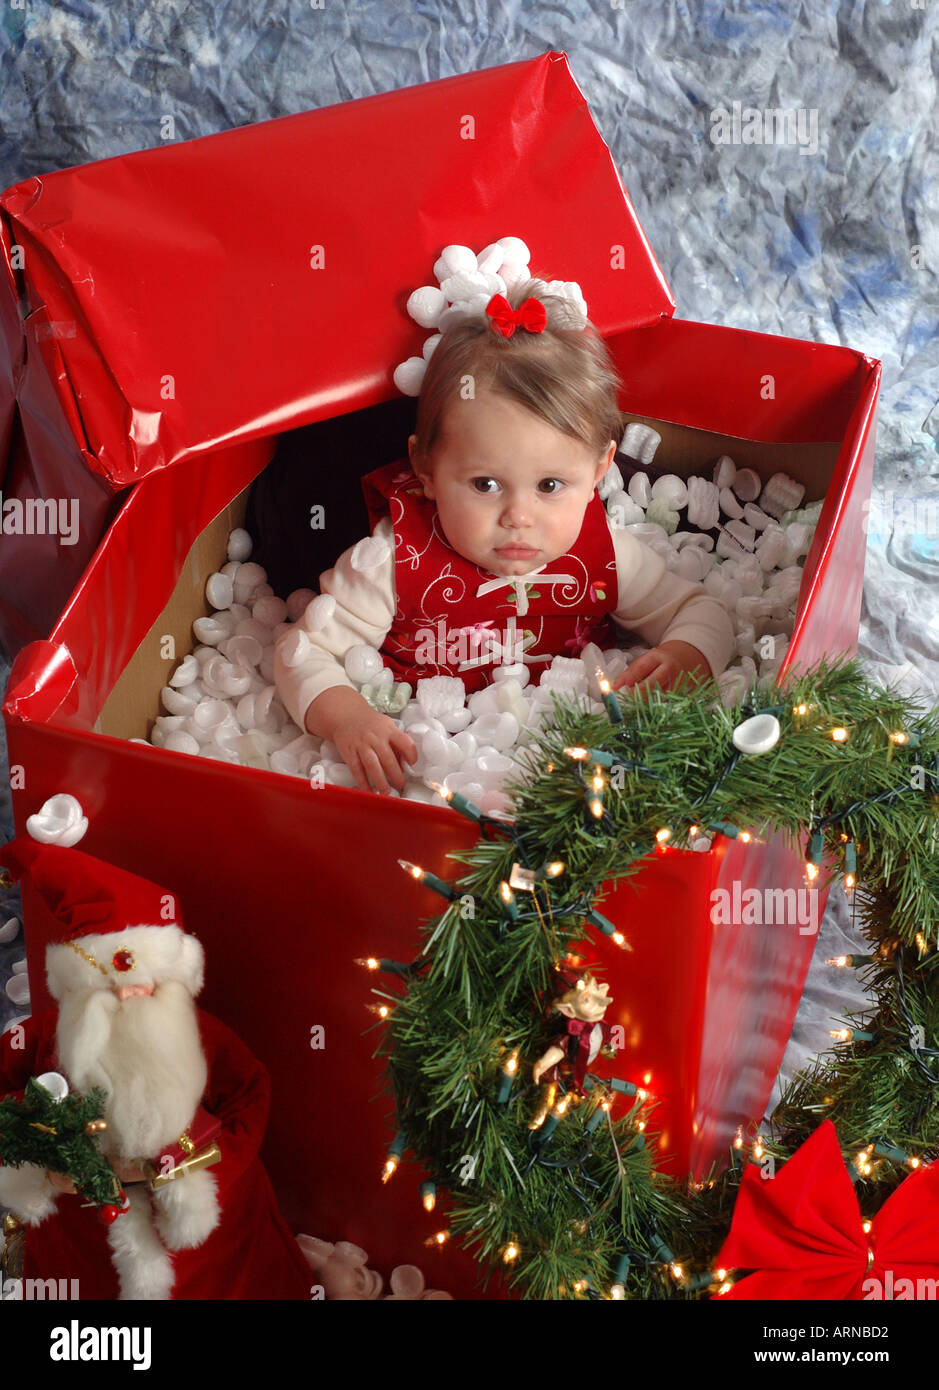 Little baby girl as a Christmas present Stock Photo